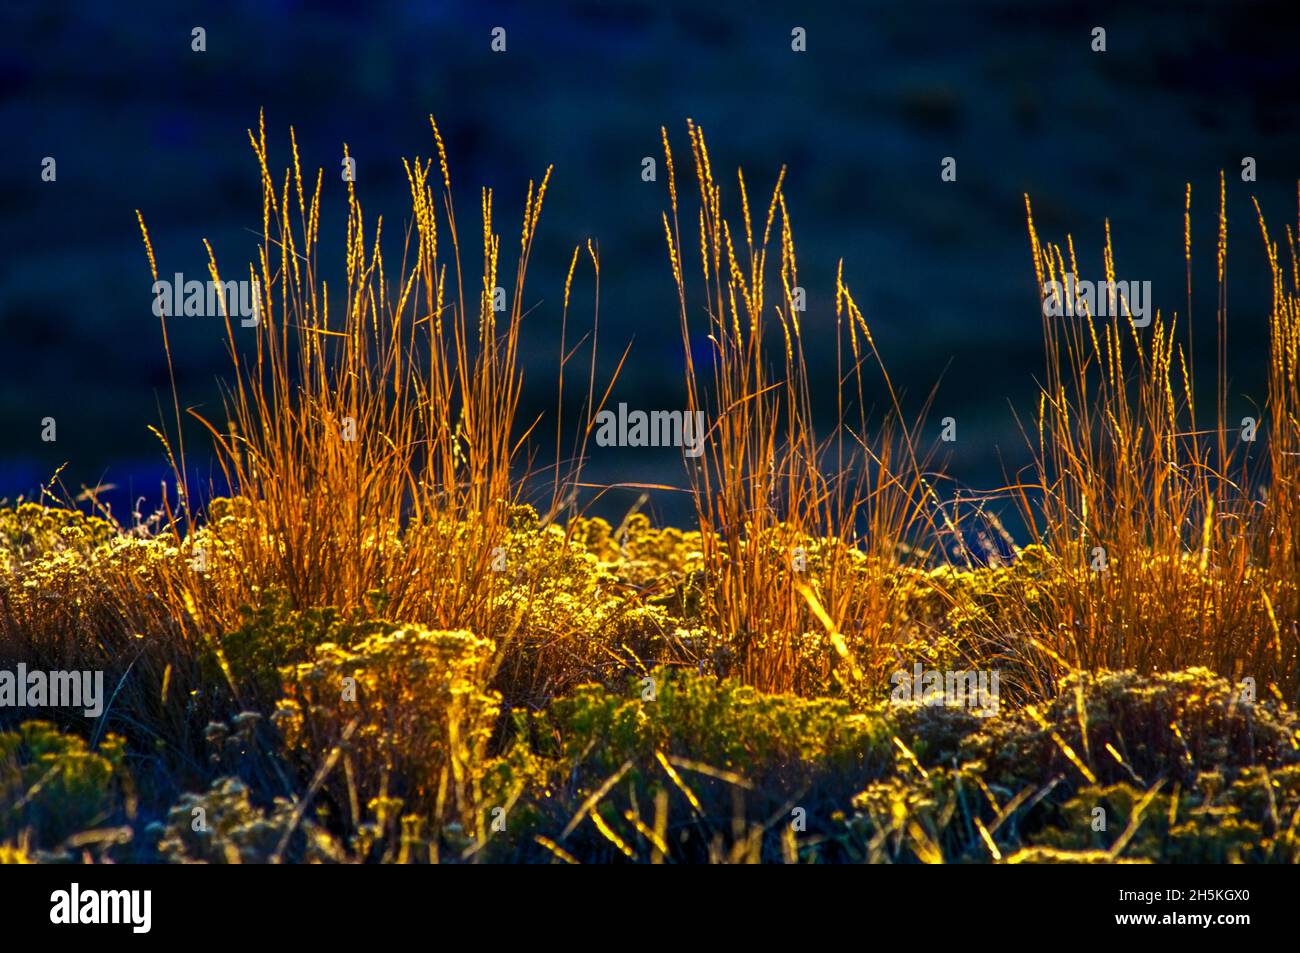 Close-up of clumps of great basin wild rye (Leymus cinereus) and rabbit brush (Ericameria nauseosa) shrubs in the last low sweep of light before su... Stock Photo